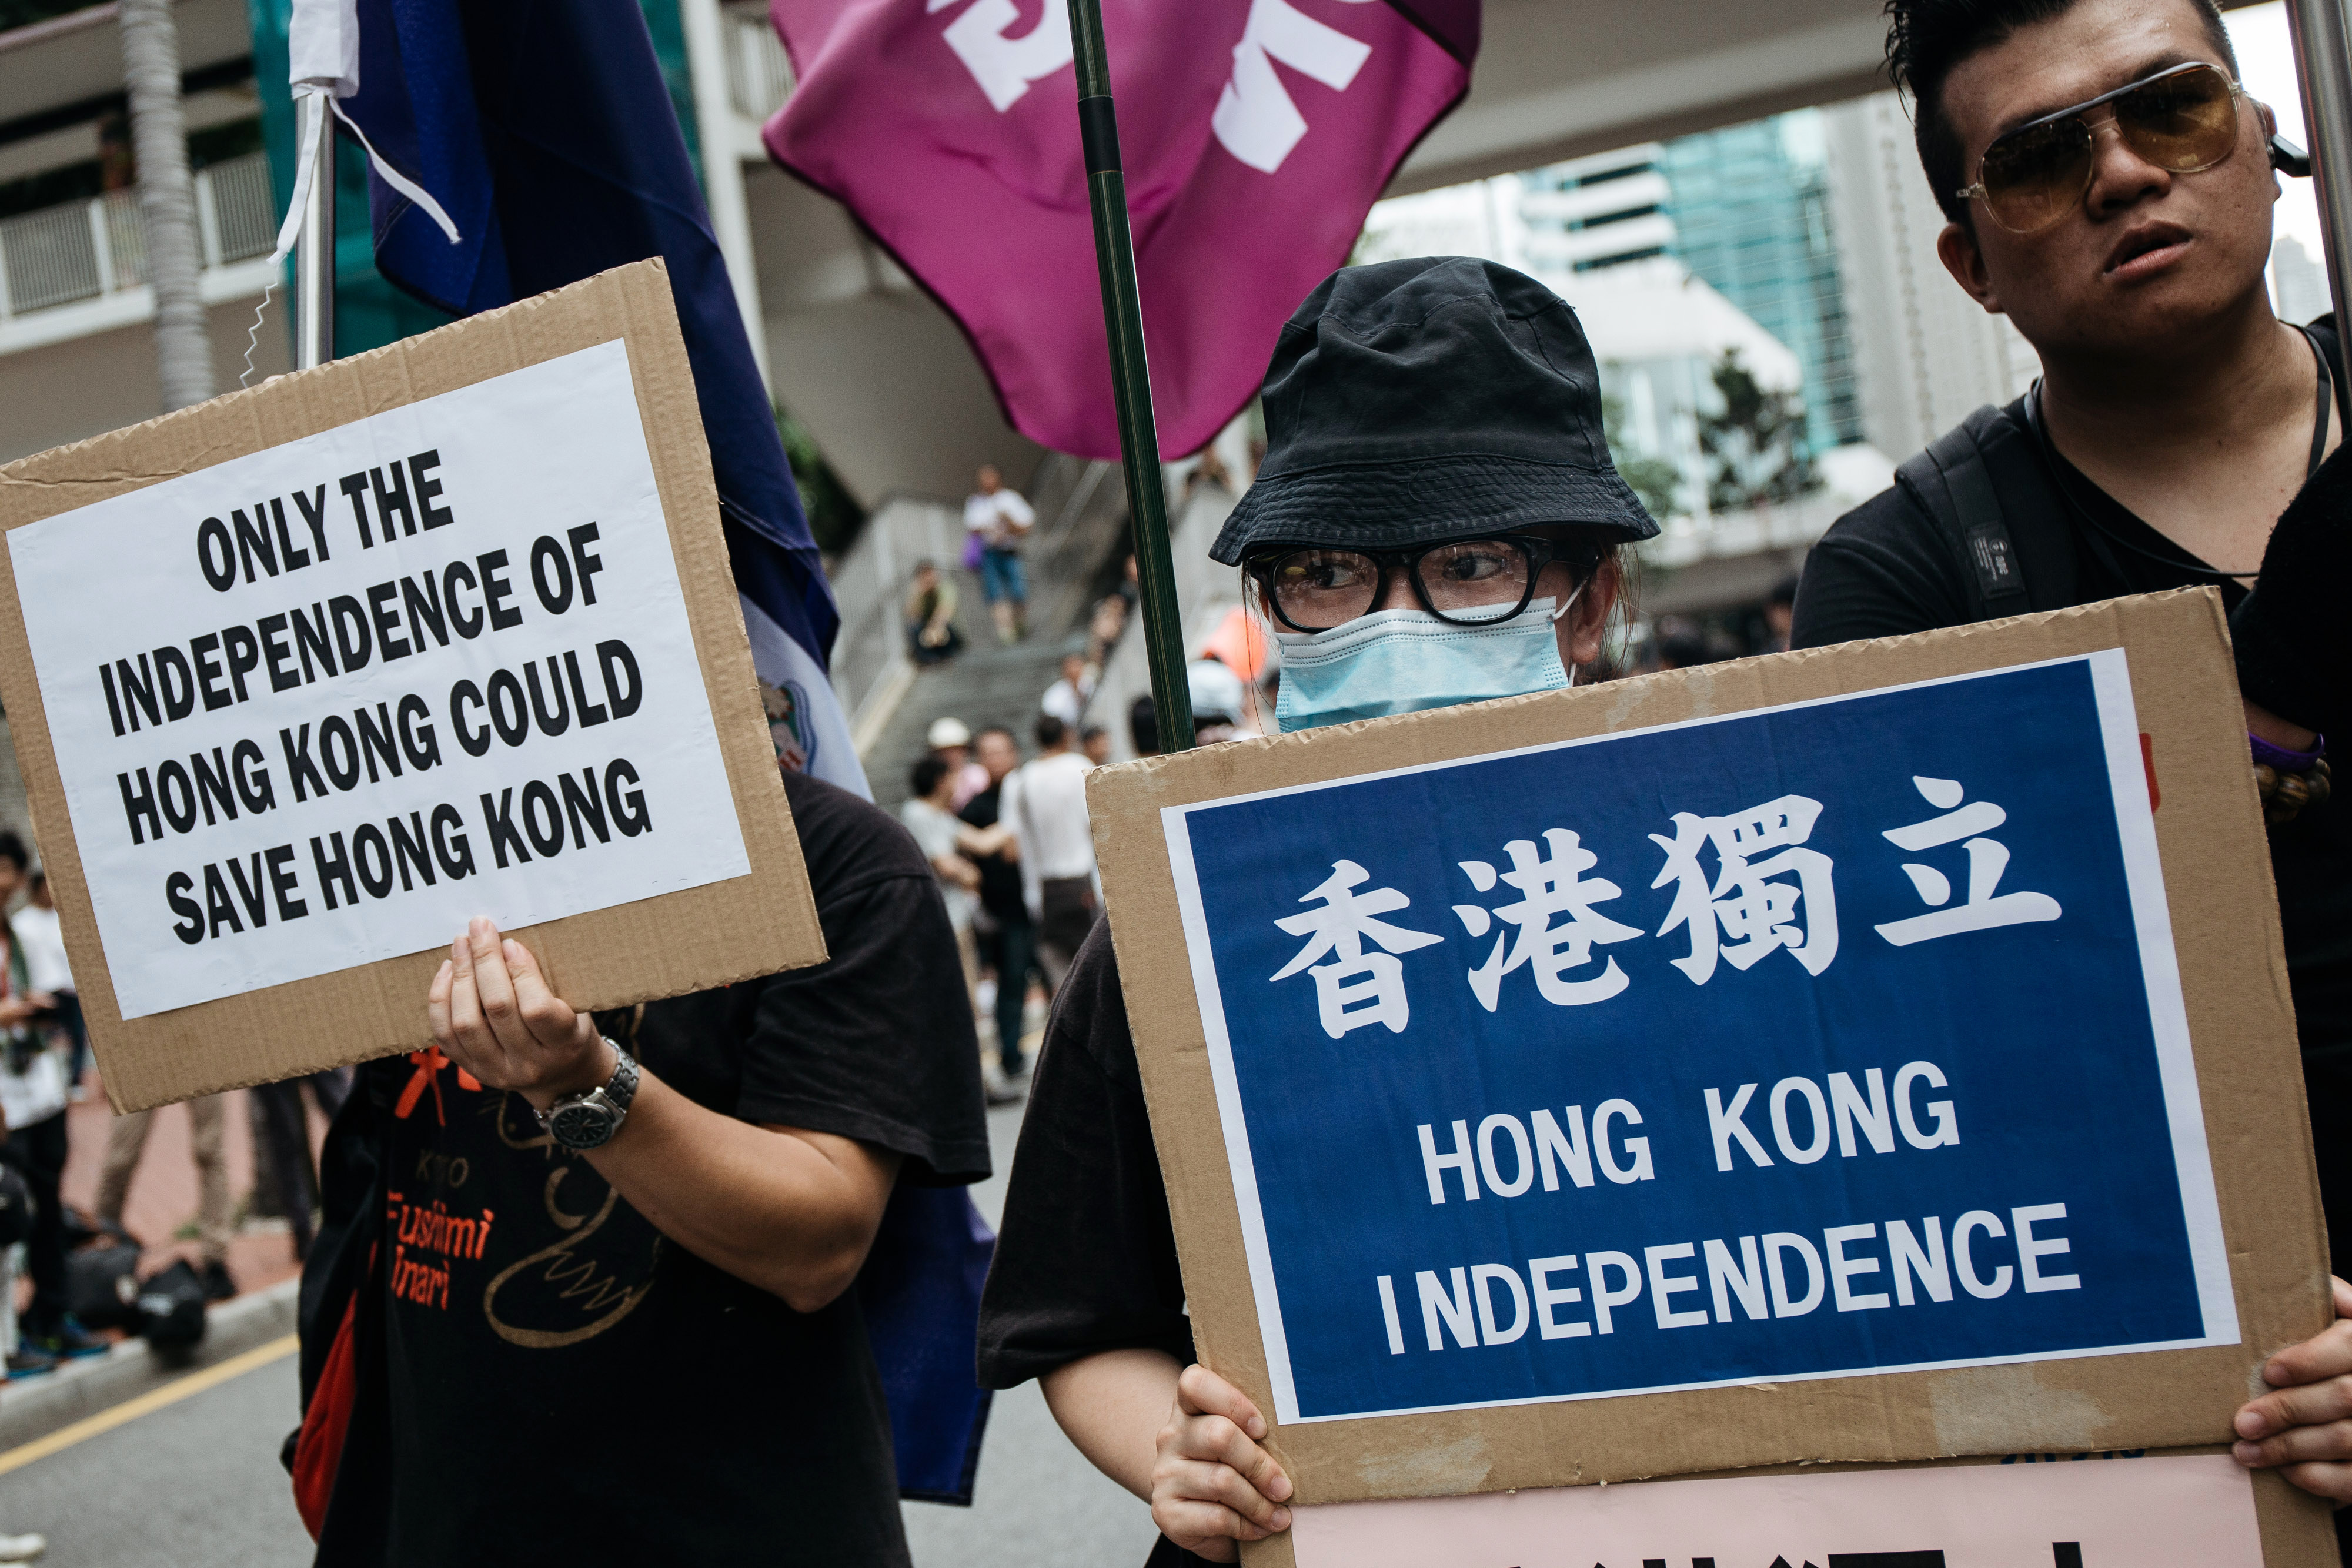 Protesters hold placards calling for Hong Kong's independence as they march on the street during a rally on July 1, 2016, in Hong Kong (Bloomberg/Getty Images)